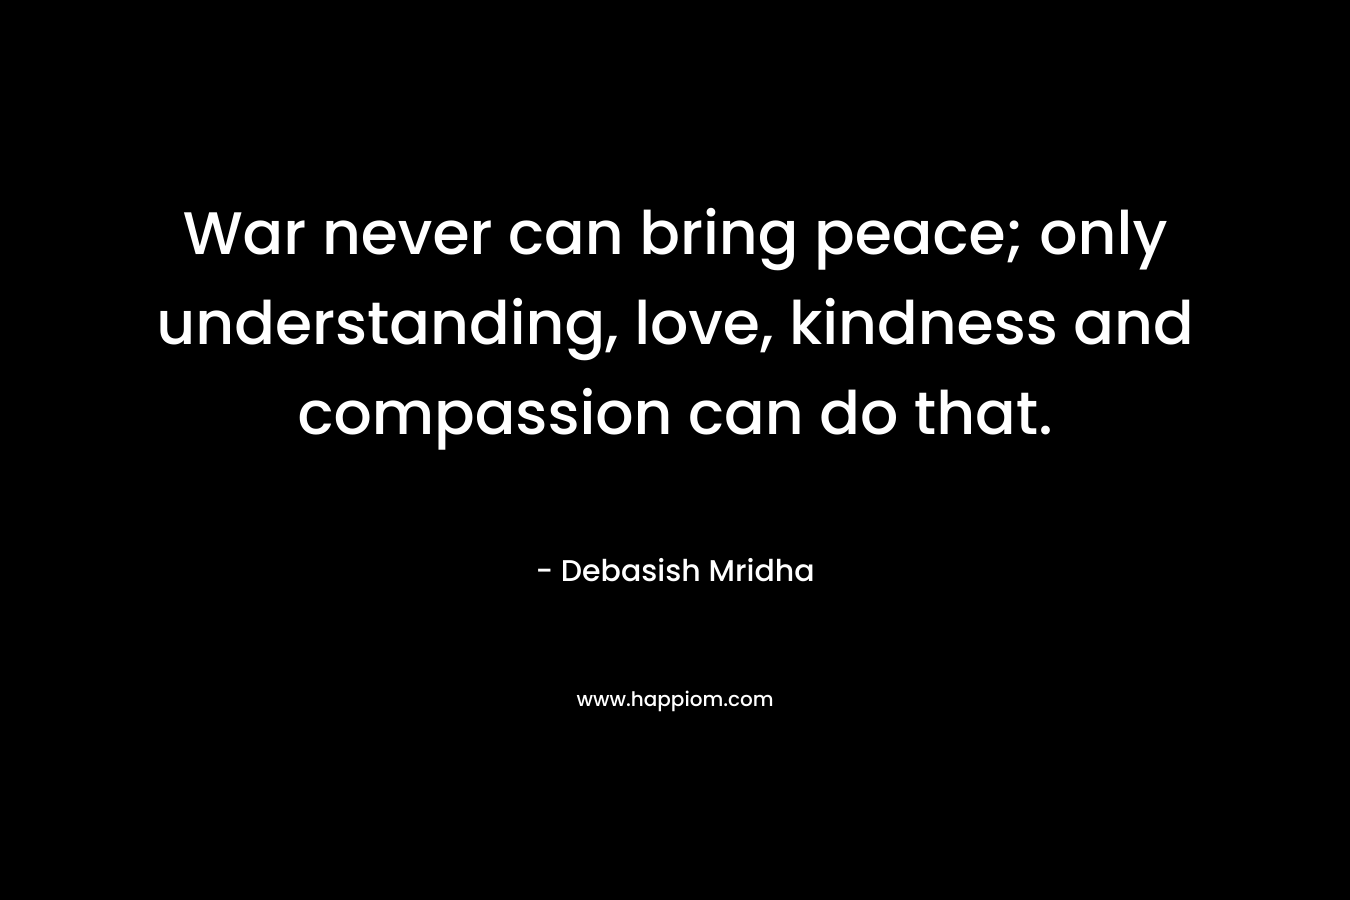 War never can bring peace; only understanding, love, kindness and compassion can do that.